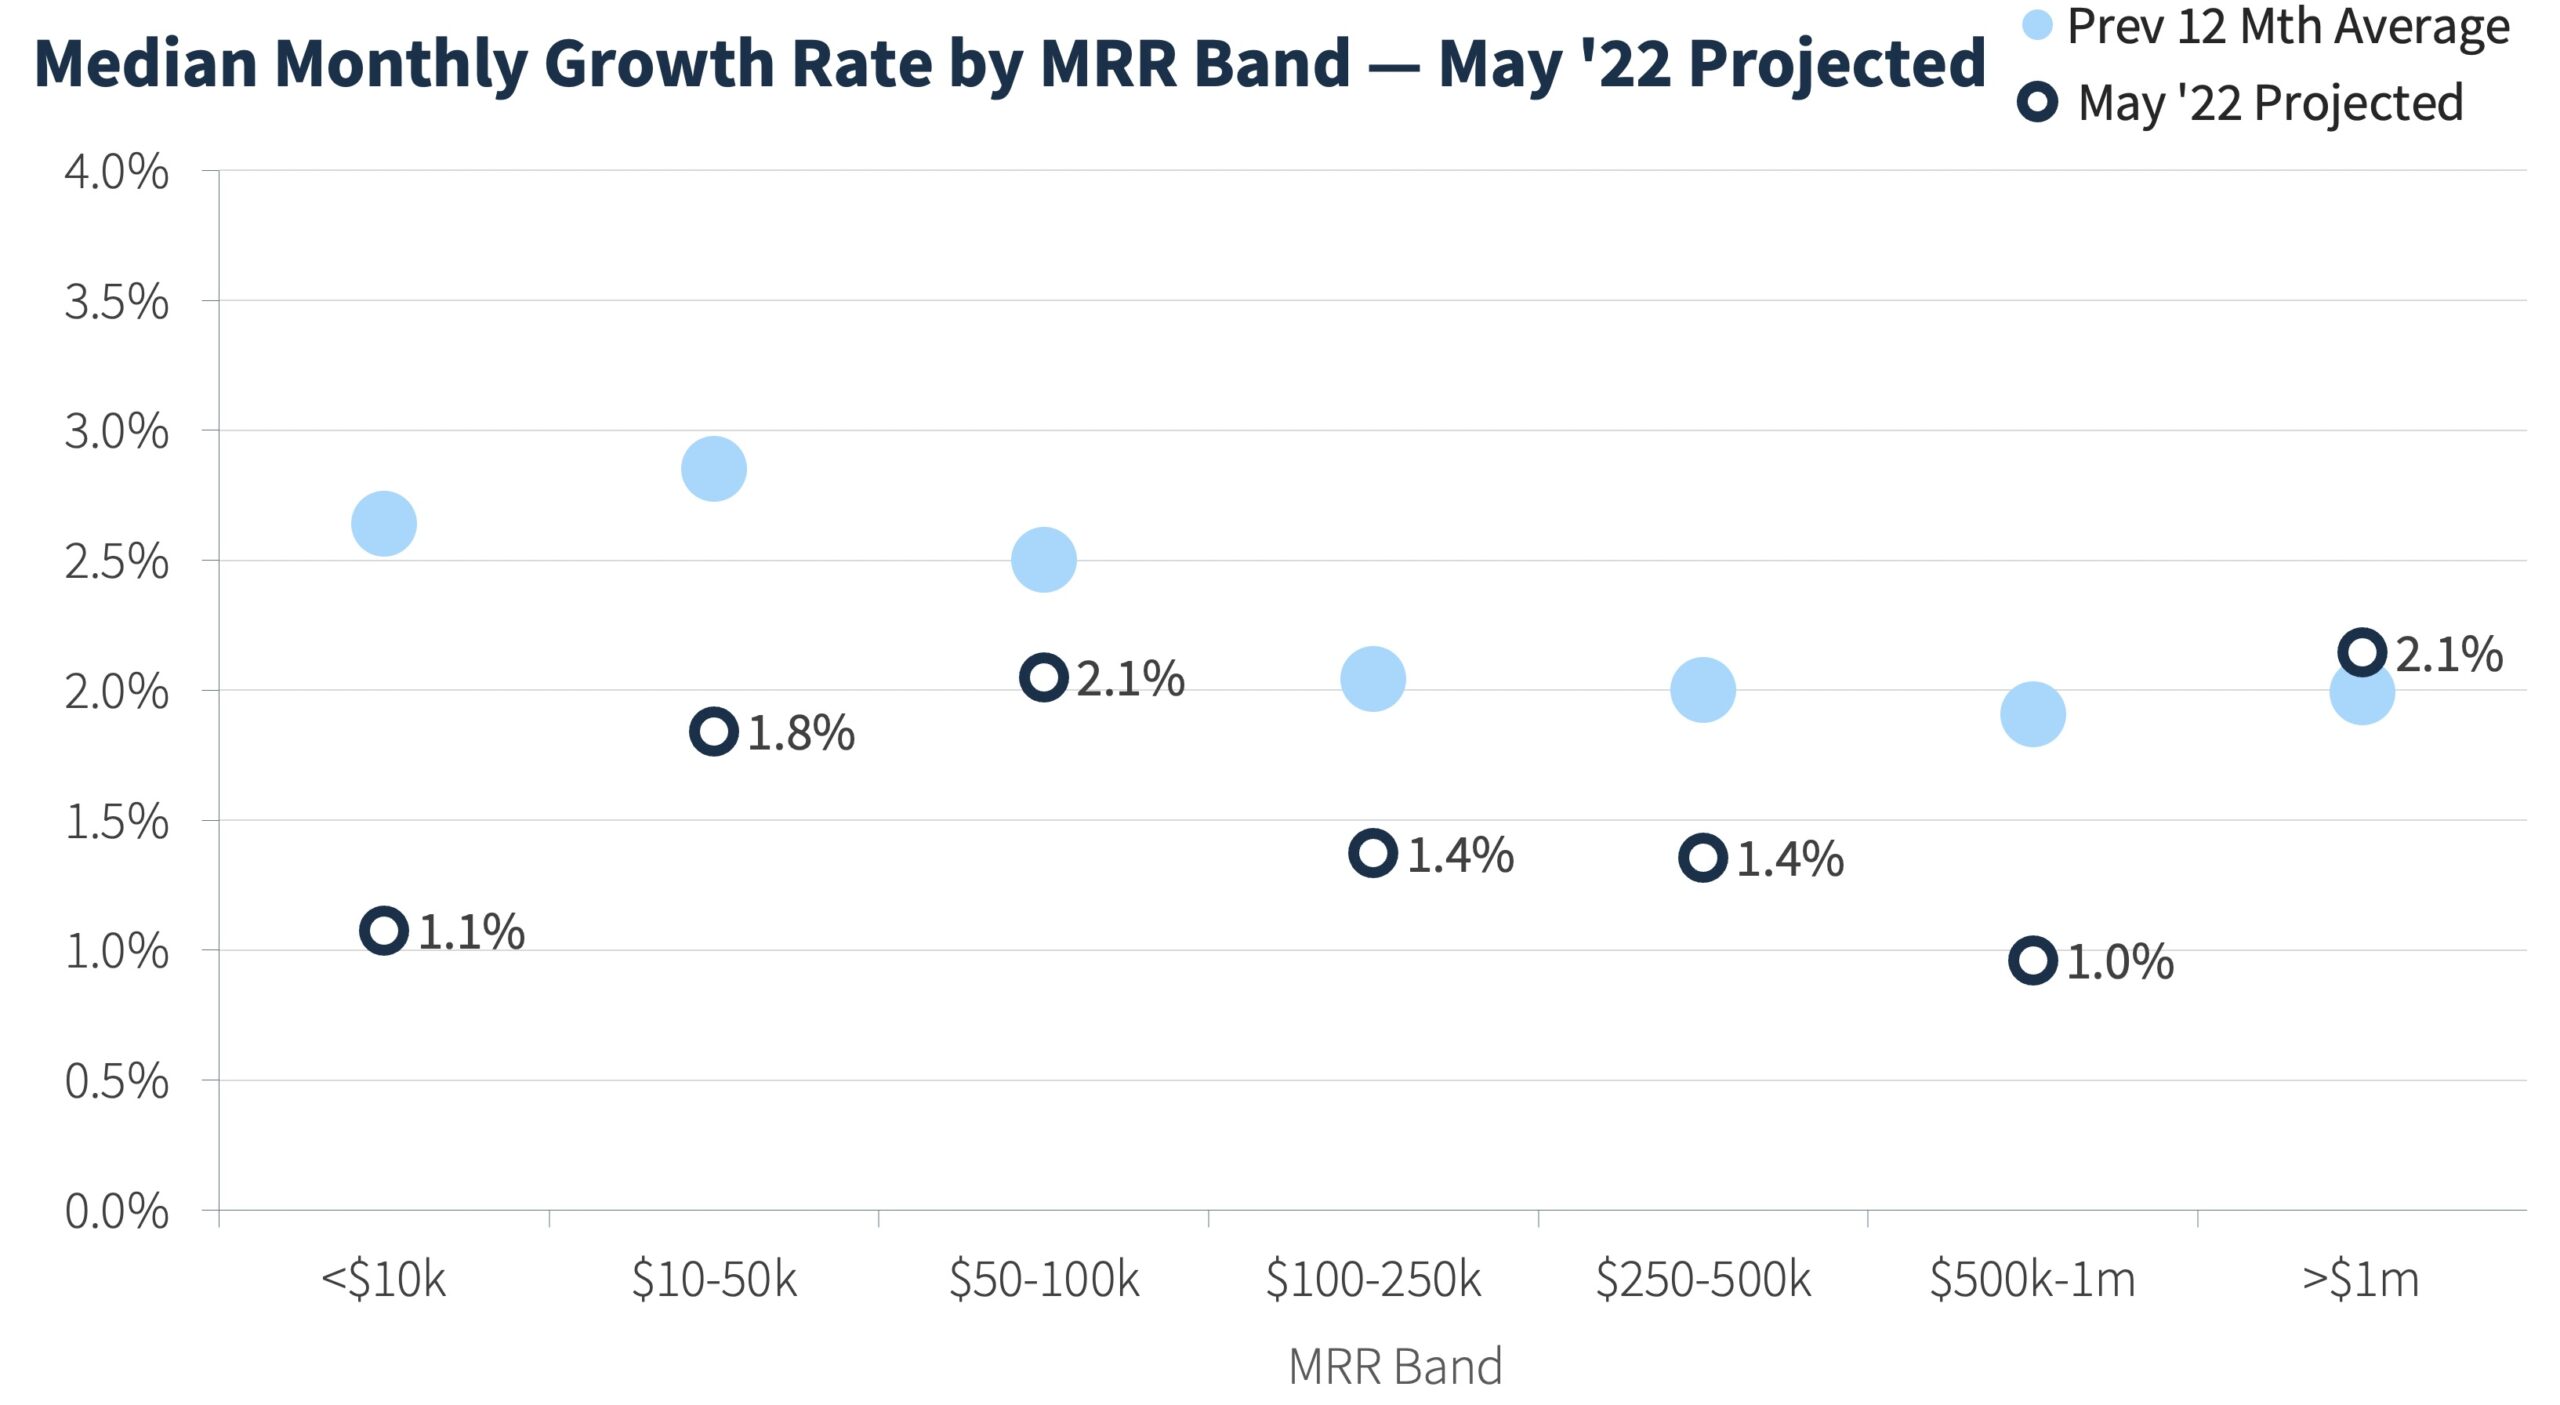 SaaS Growth Slowdown for the month of May